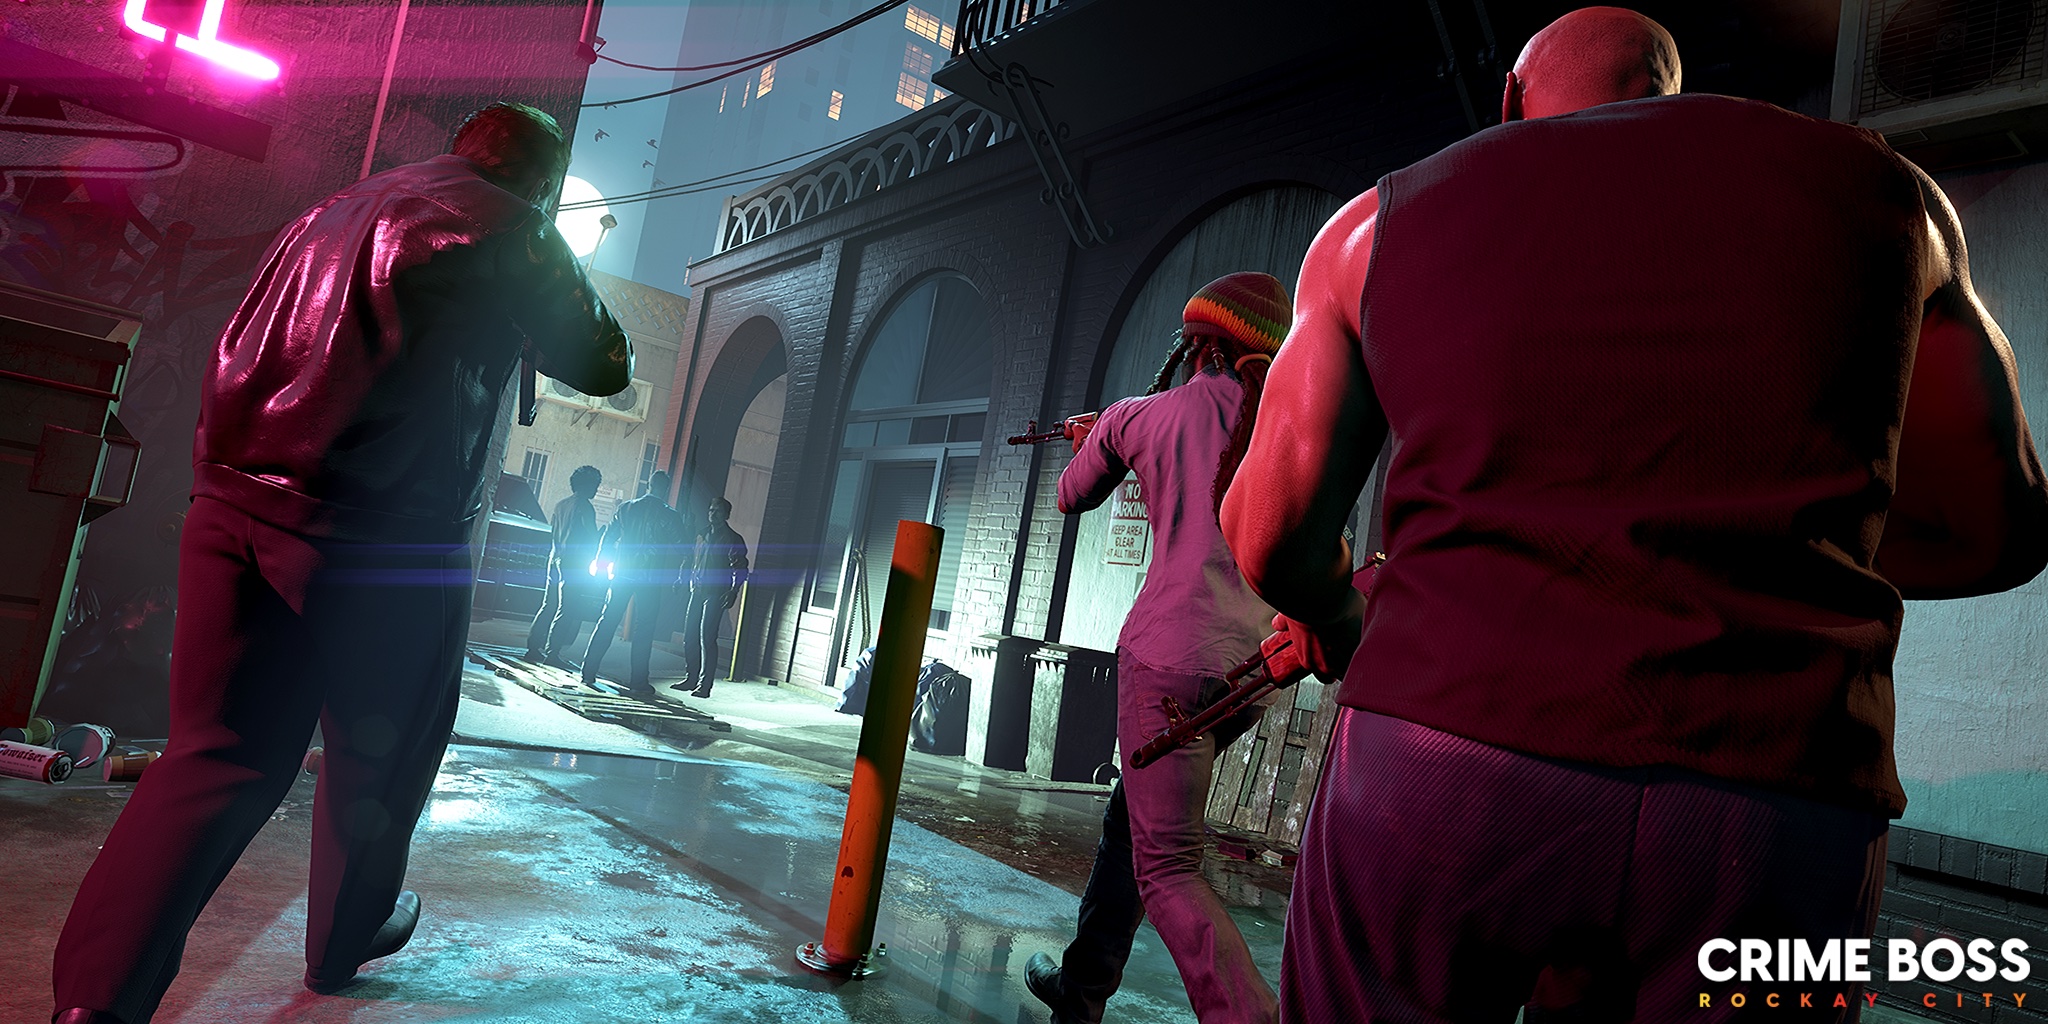 A group of armed men approach another group in a dark alley in a screenshot from Crime Boss: Rockay City